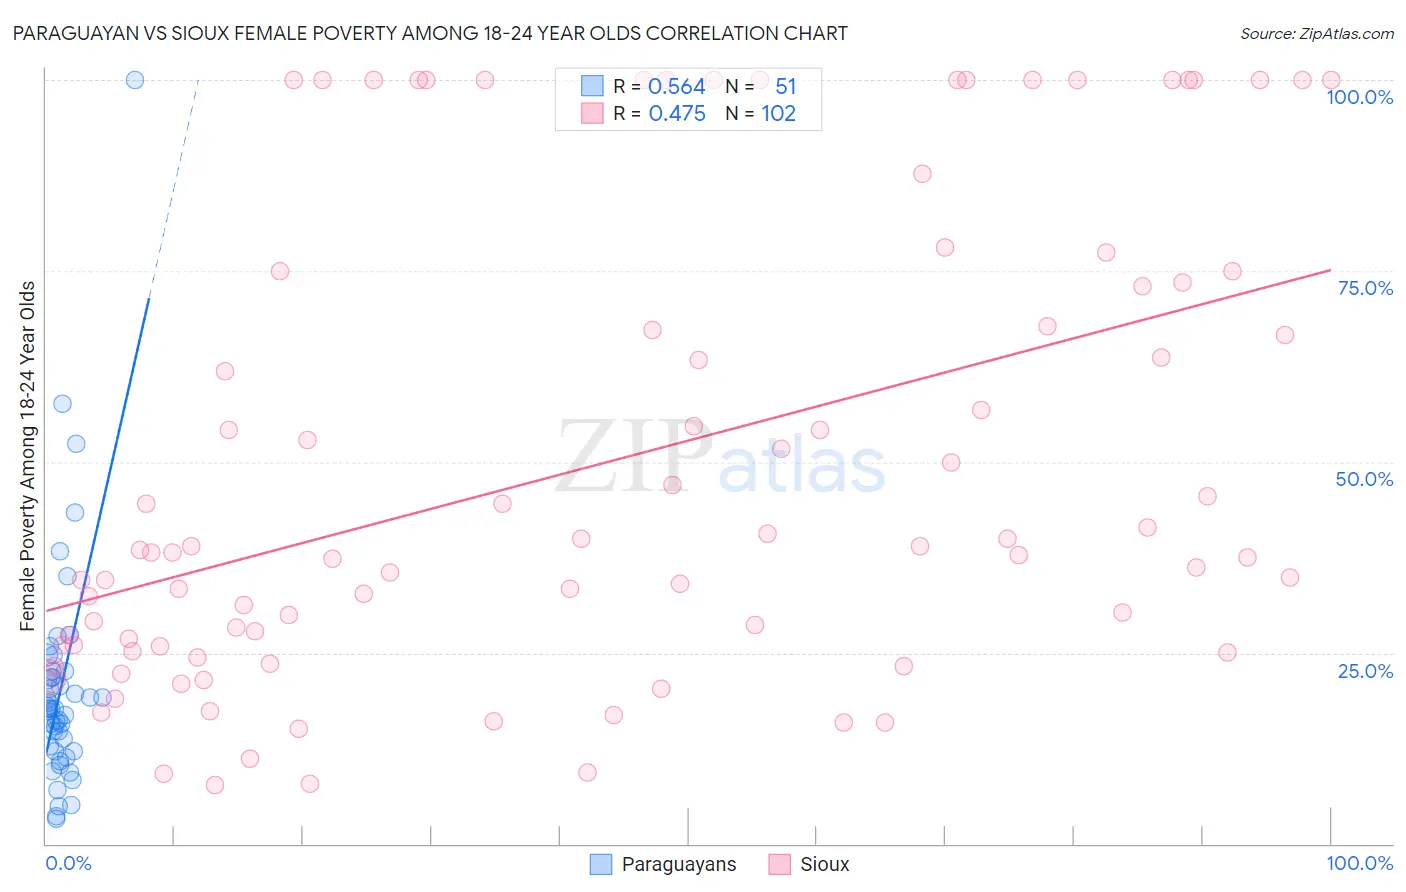 Paraguayan vs Sioux Female Poverty Among 18-24 Year Olds